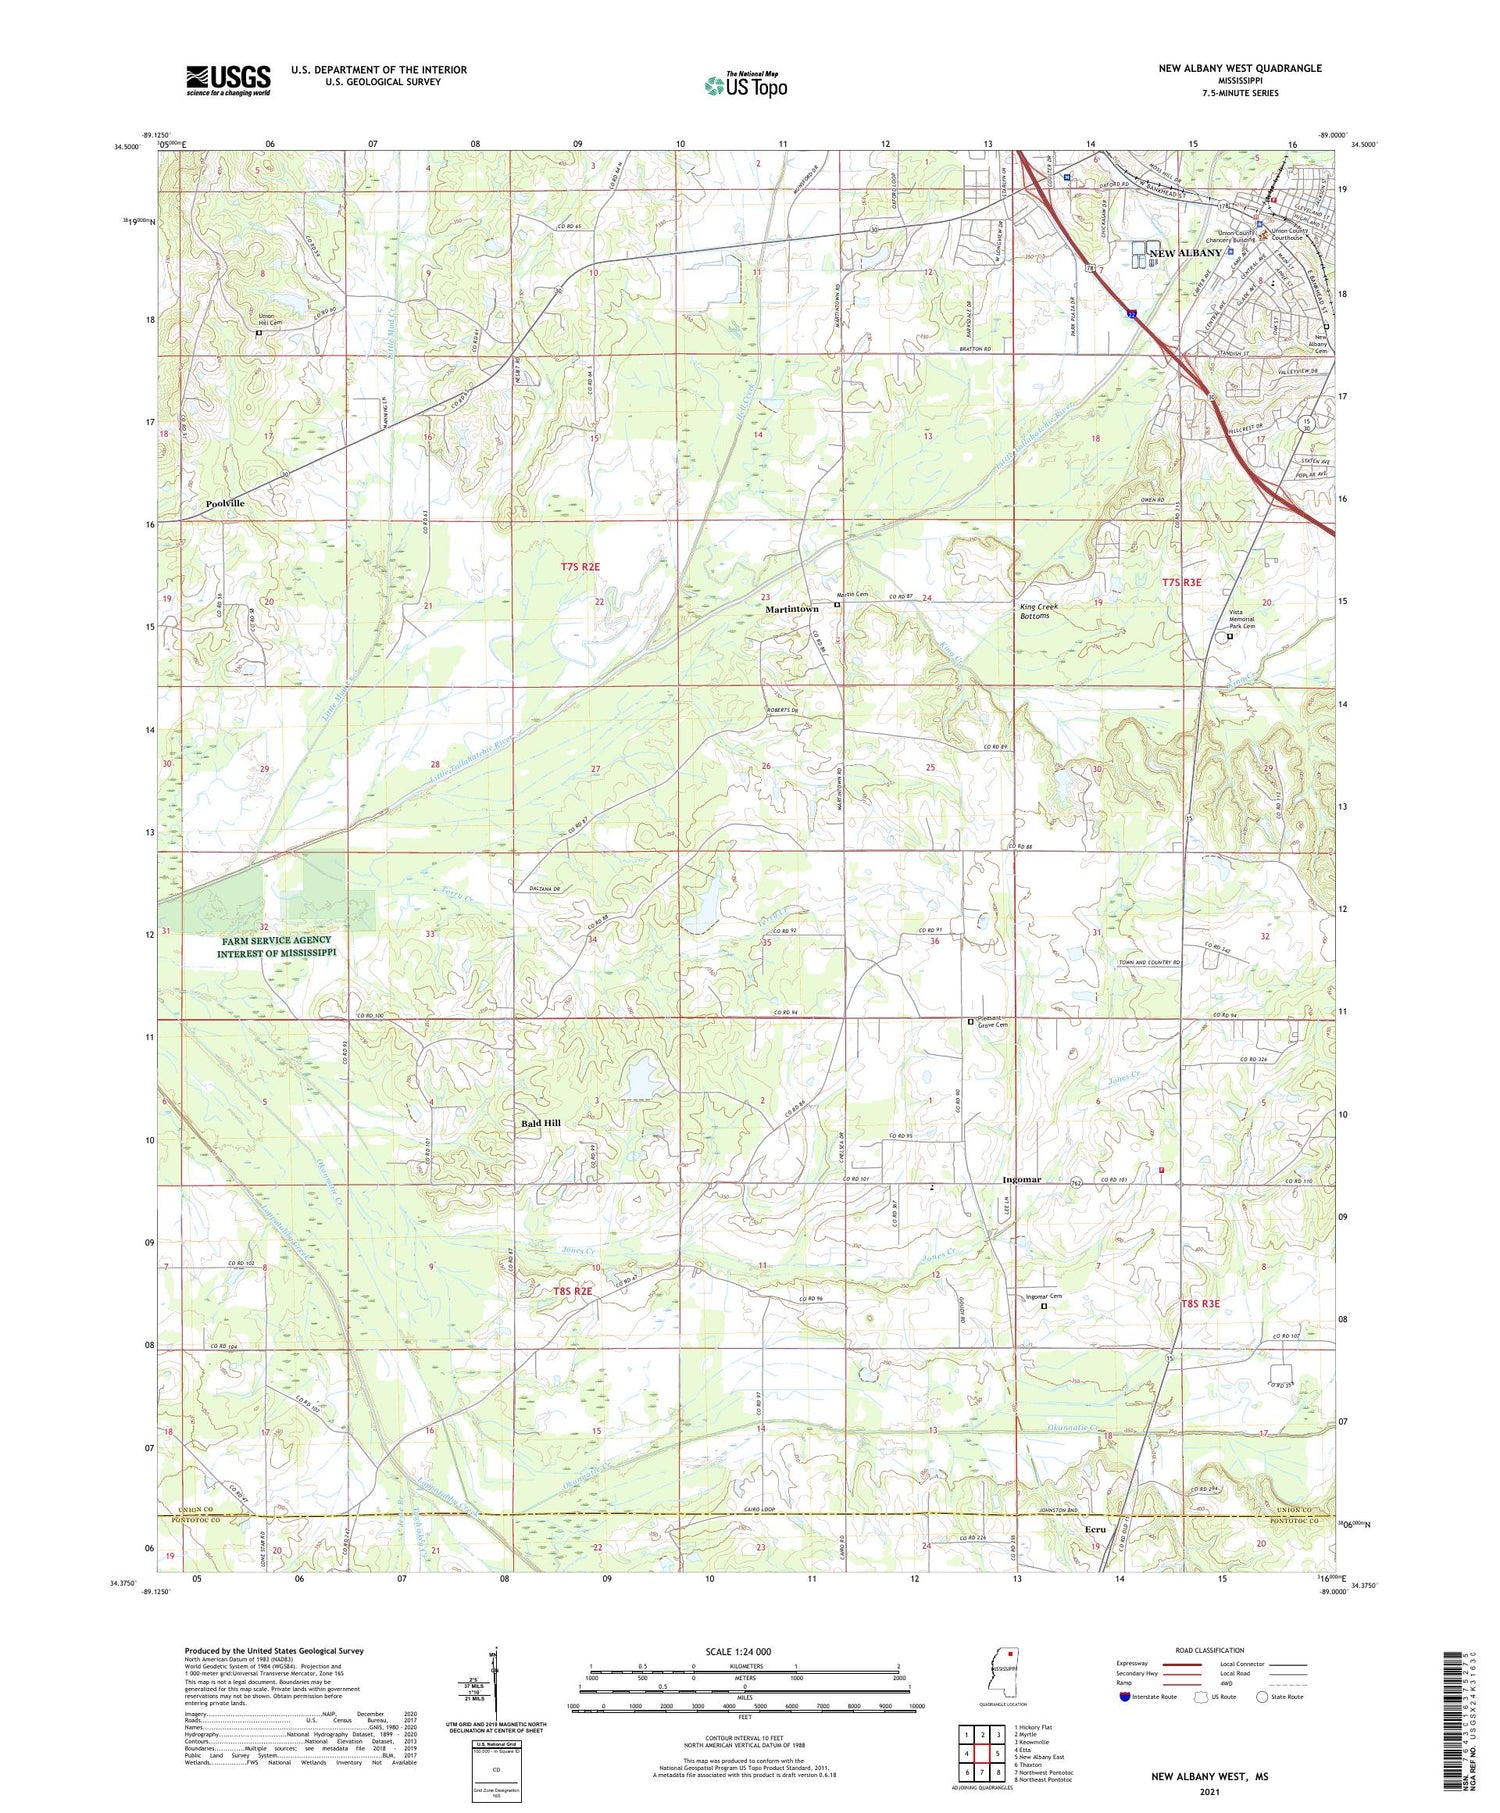 New Albany West Mississippi US Topo Map Image